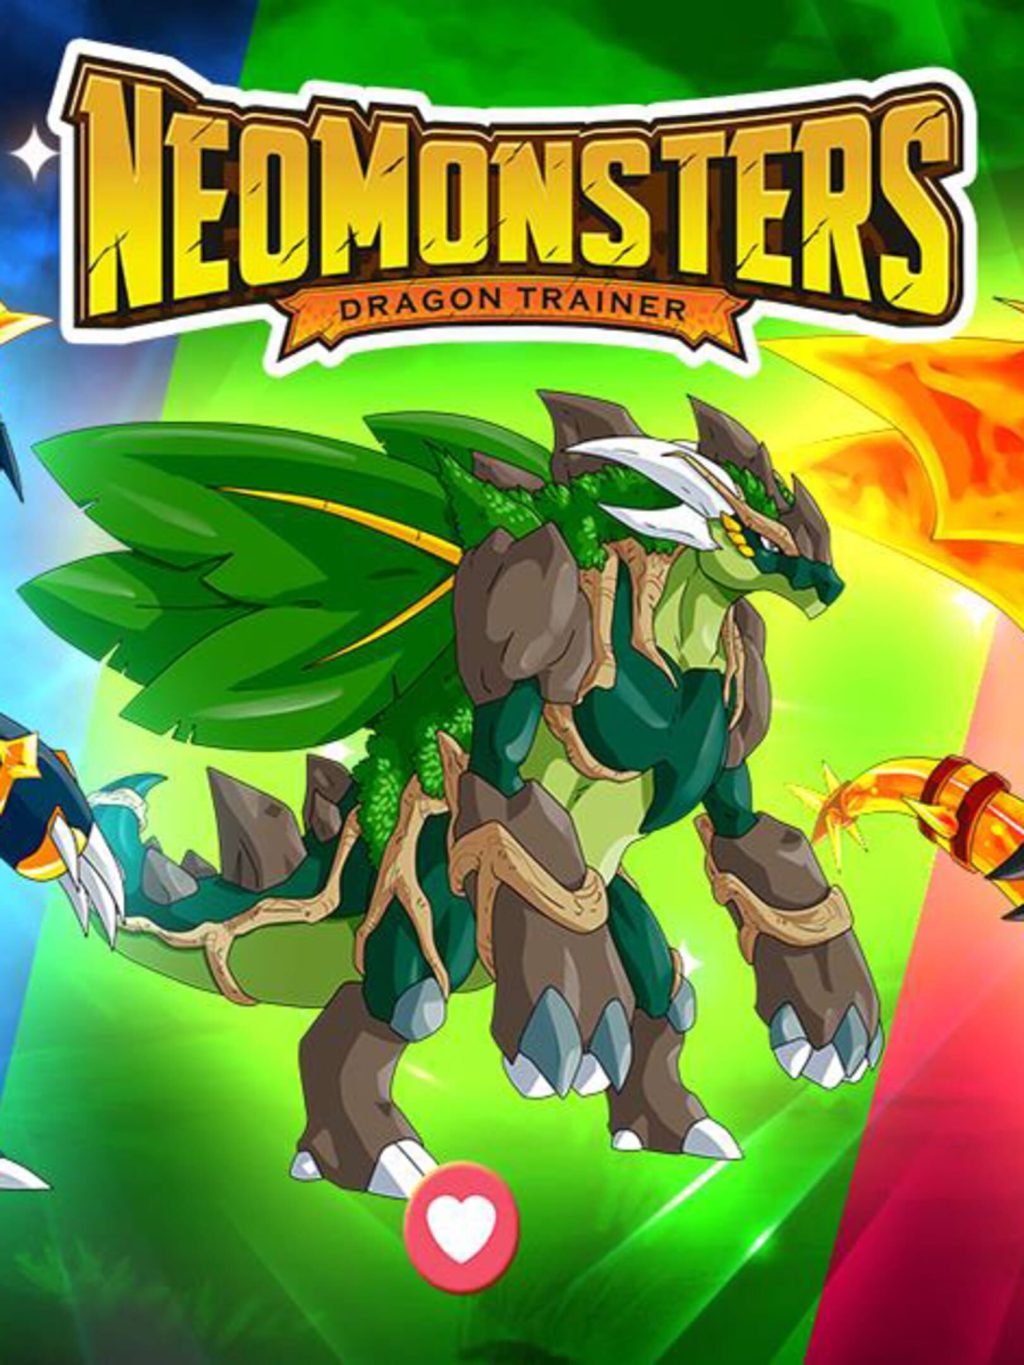 Capture over 1,000 creatures to take into battle, Neo Monsters on iOS now  FREE